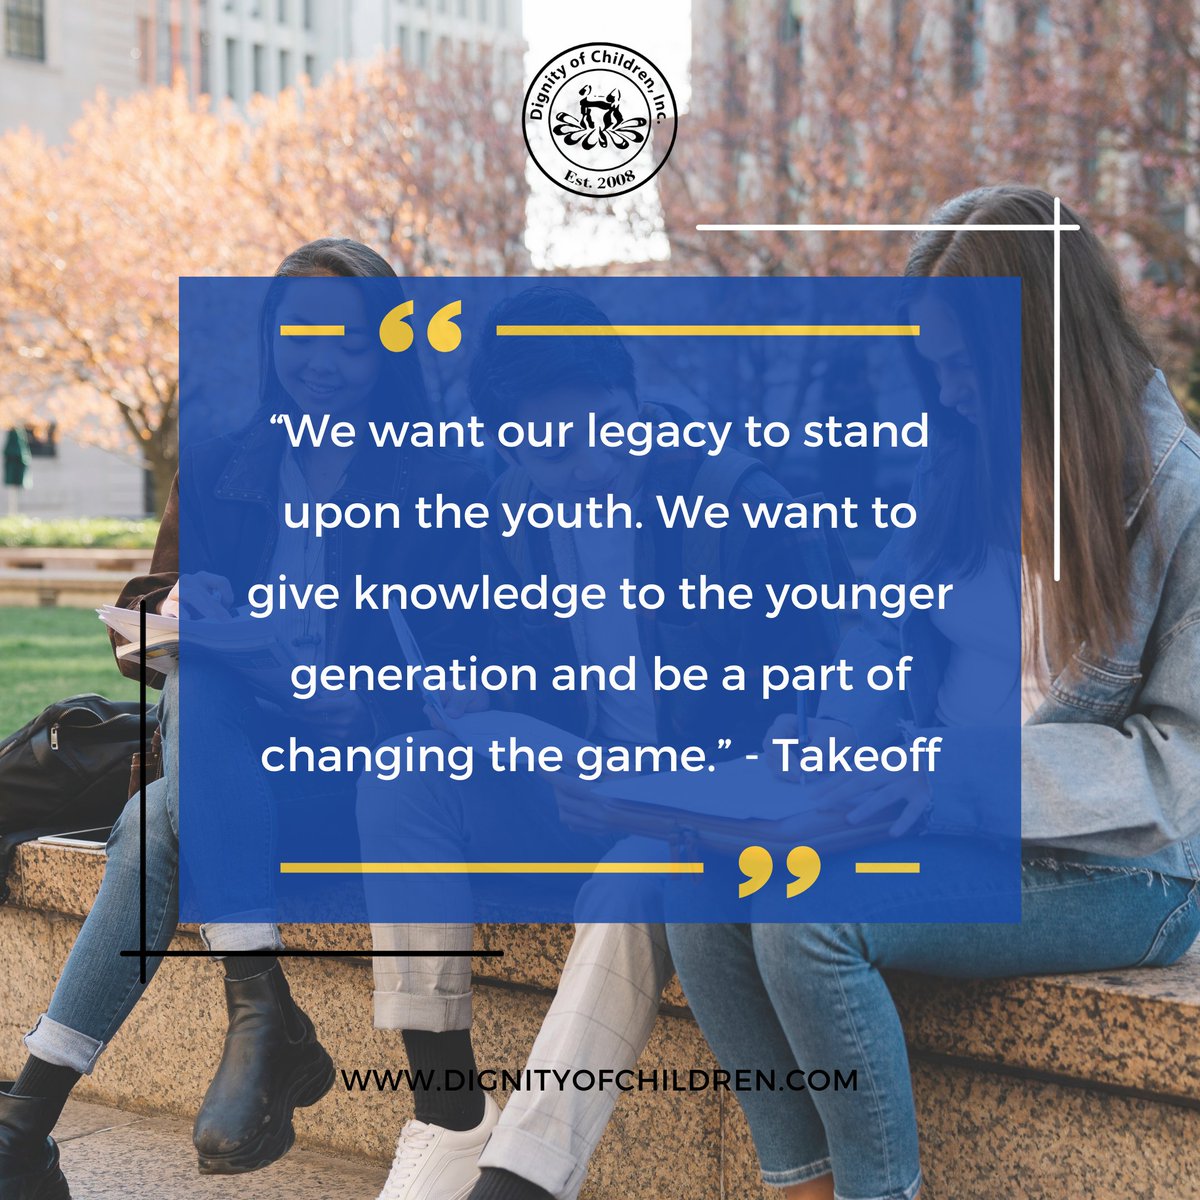 We want our legacy to stand upon the youth. We want to give knowledge to the younger generation and be a part of changing the game. – Takeoff

Learn more: dignityofchildren.com

#teachertwitter #edtech #edchat #YOUTH #dignityofchildren #21stcenturylearning #education